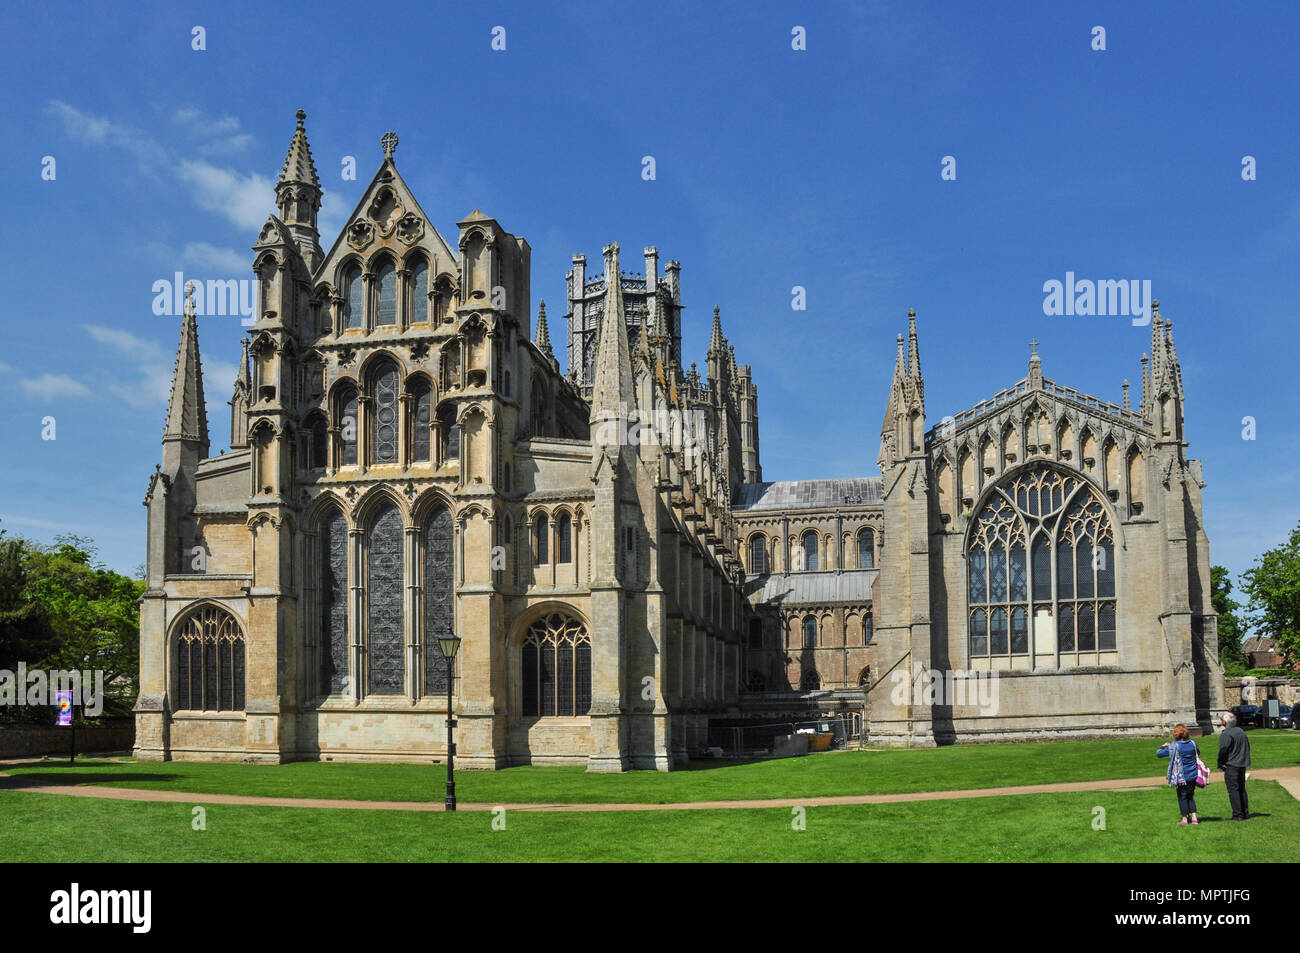 East elevation, including the Lady Chapel on the right, Ely Cathedral, Cambridgeshire, England, UK Stock Photo